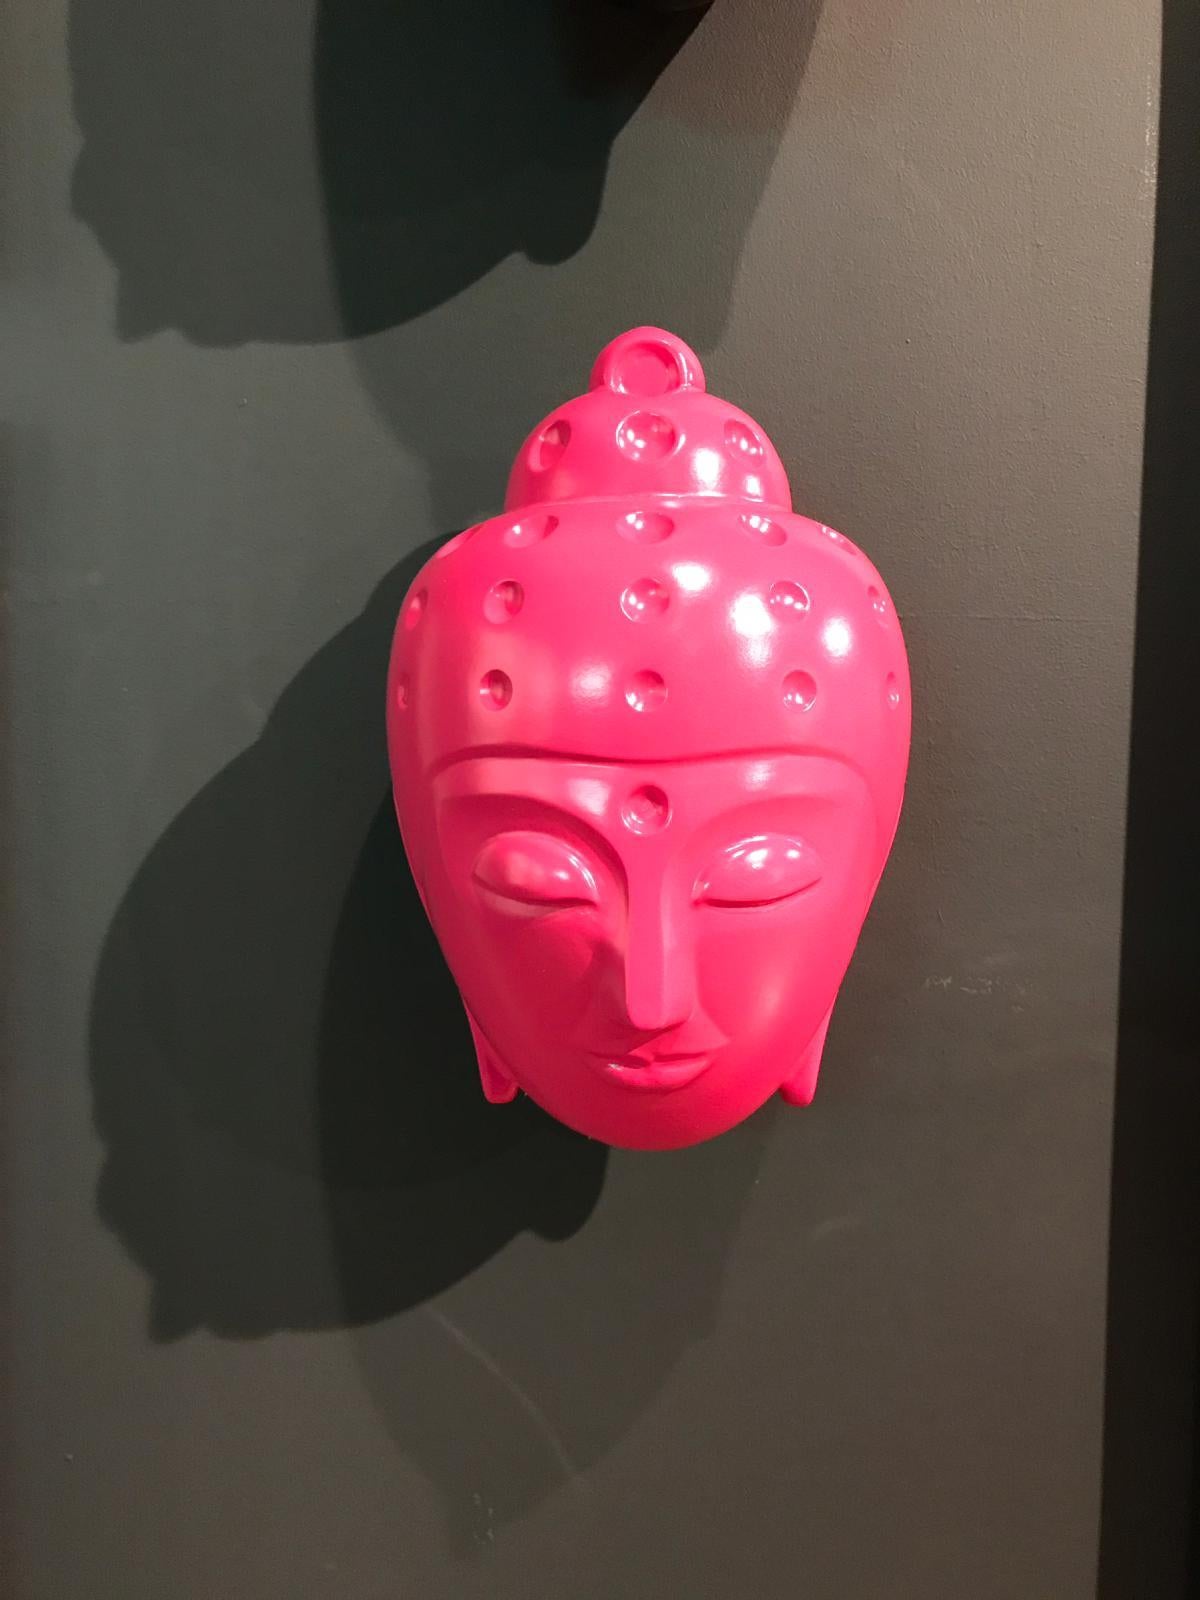 Tal Nehoray Figurative Sculpture - Floating Buddha head Statue - Bright Pink